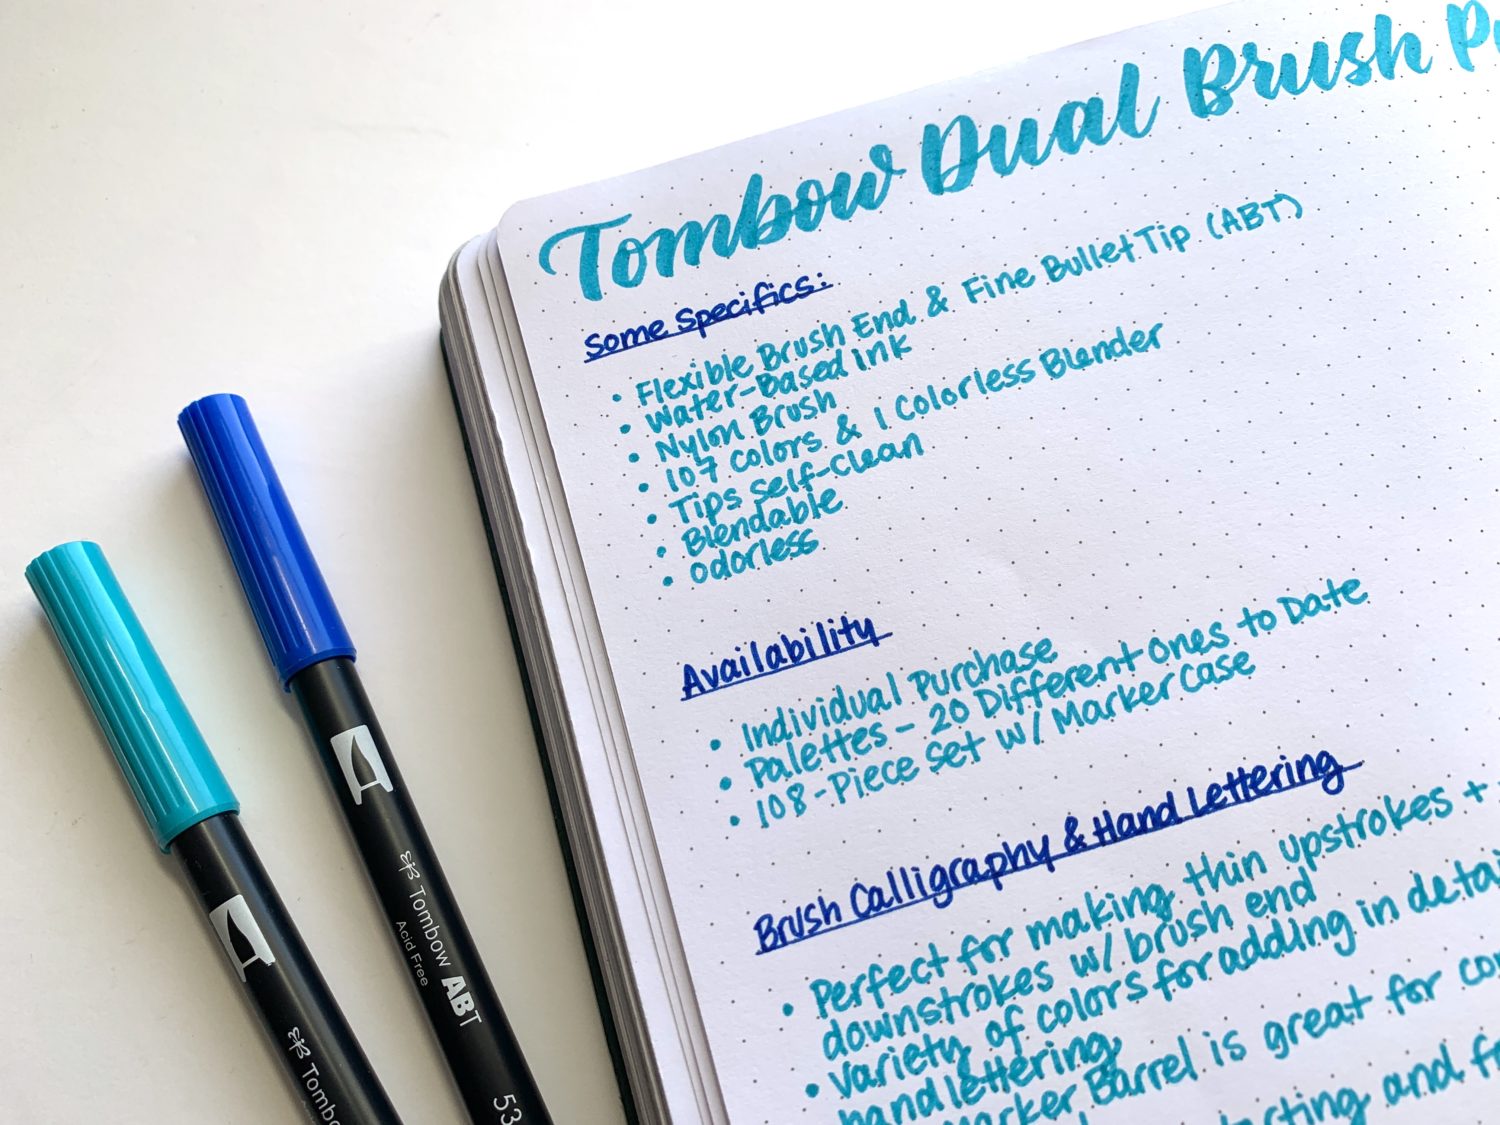 How can you use @TombowUSA Dual Brush Pens in your art work? Learn how in this review by @LePereLetters! #dualbrushpens #brushmarkers #tombow